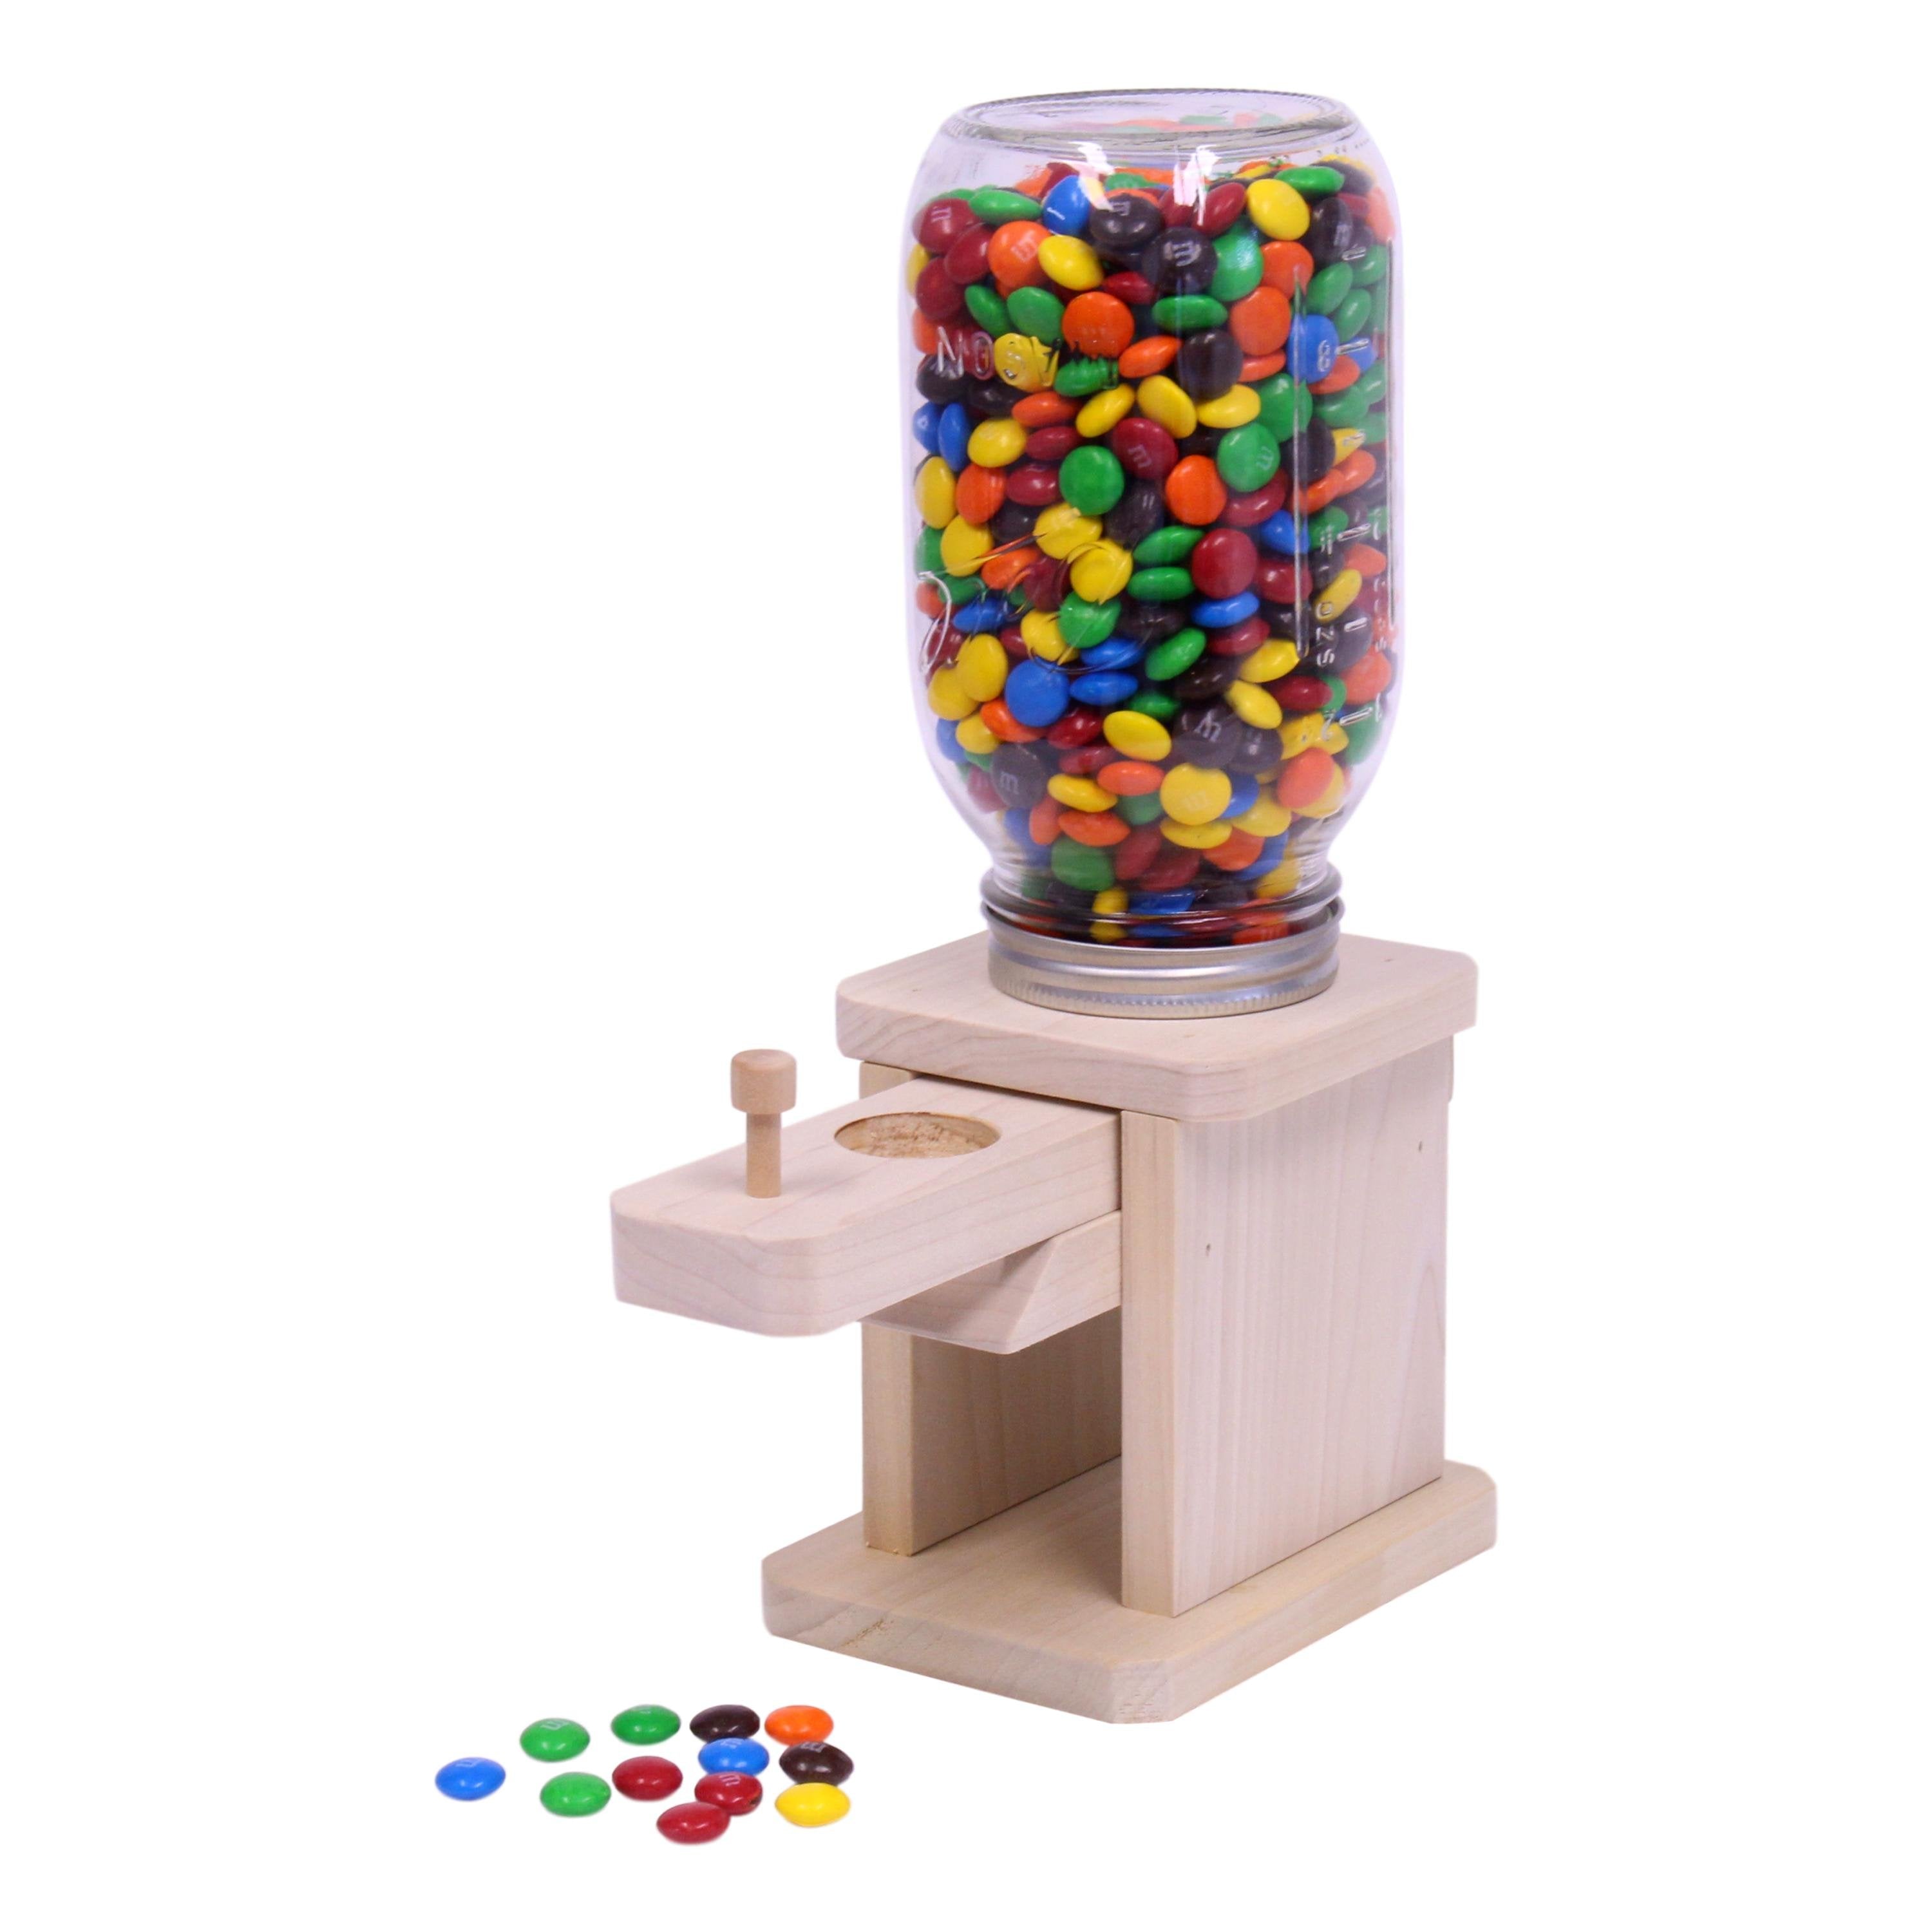 Amish-Made Jar Candy Dispenser - Great for M&M's, Peanuts, or Jelly Be –